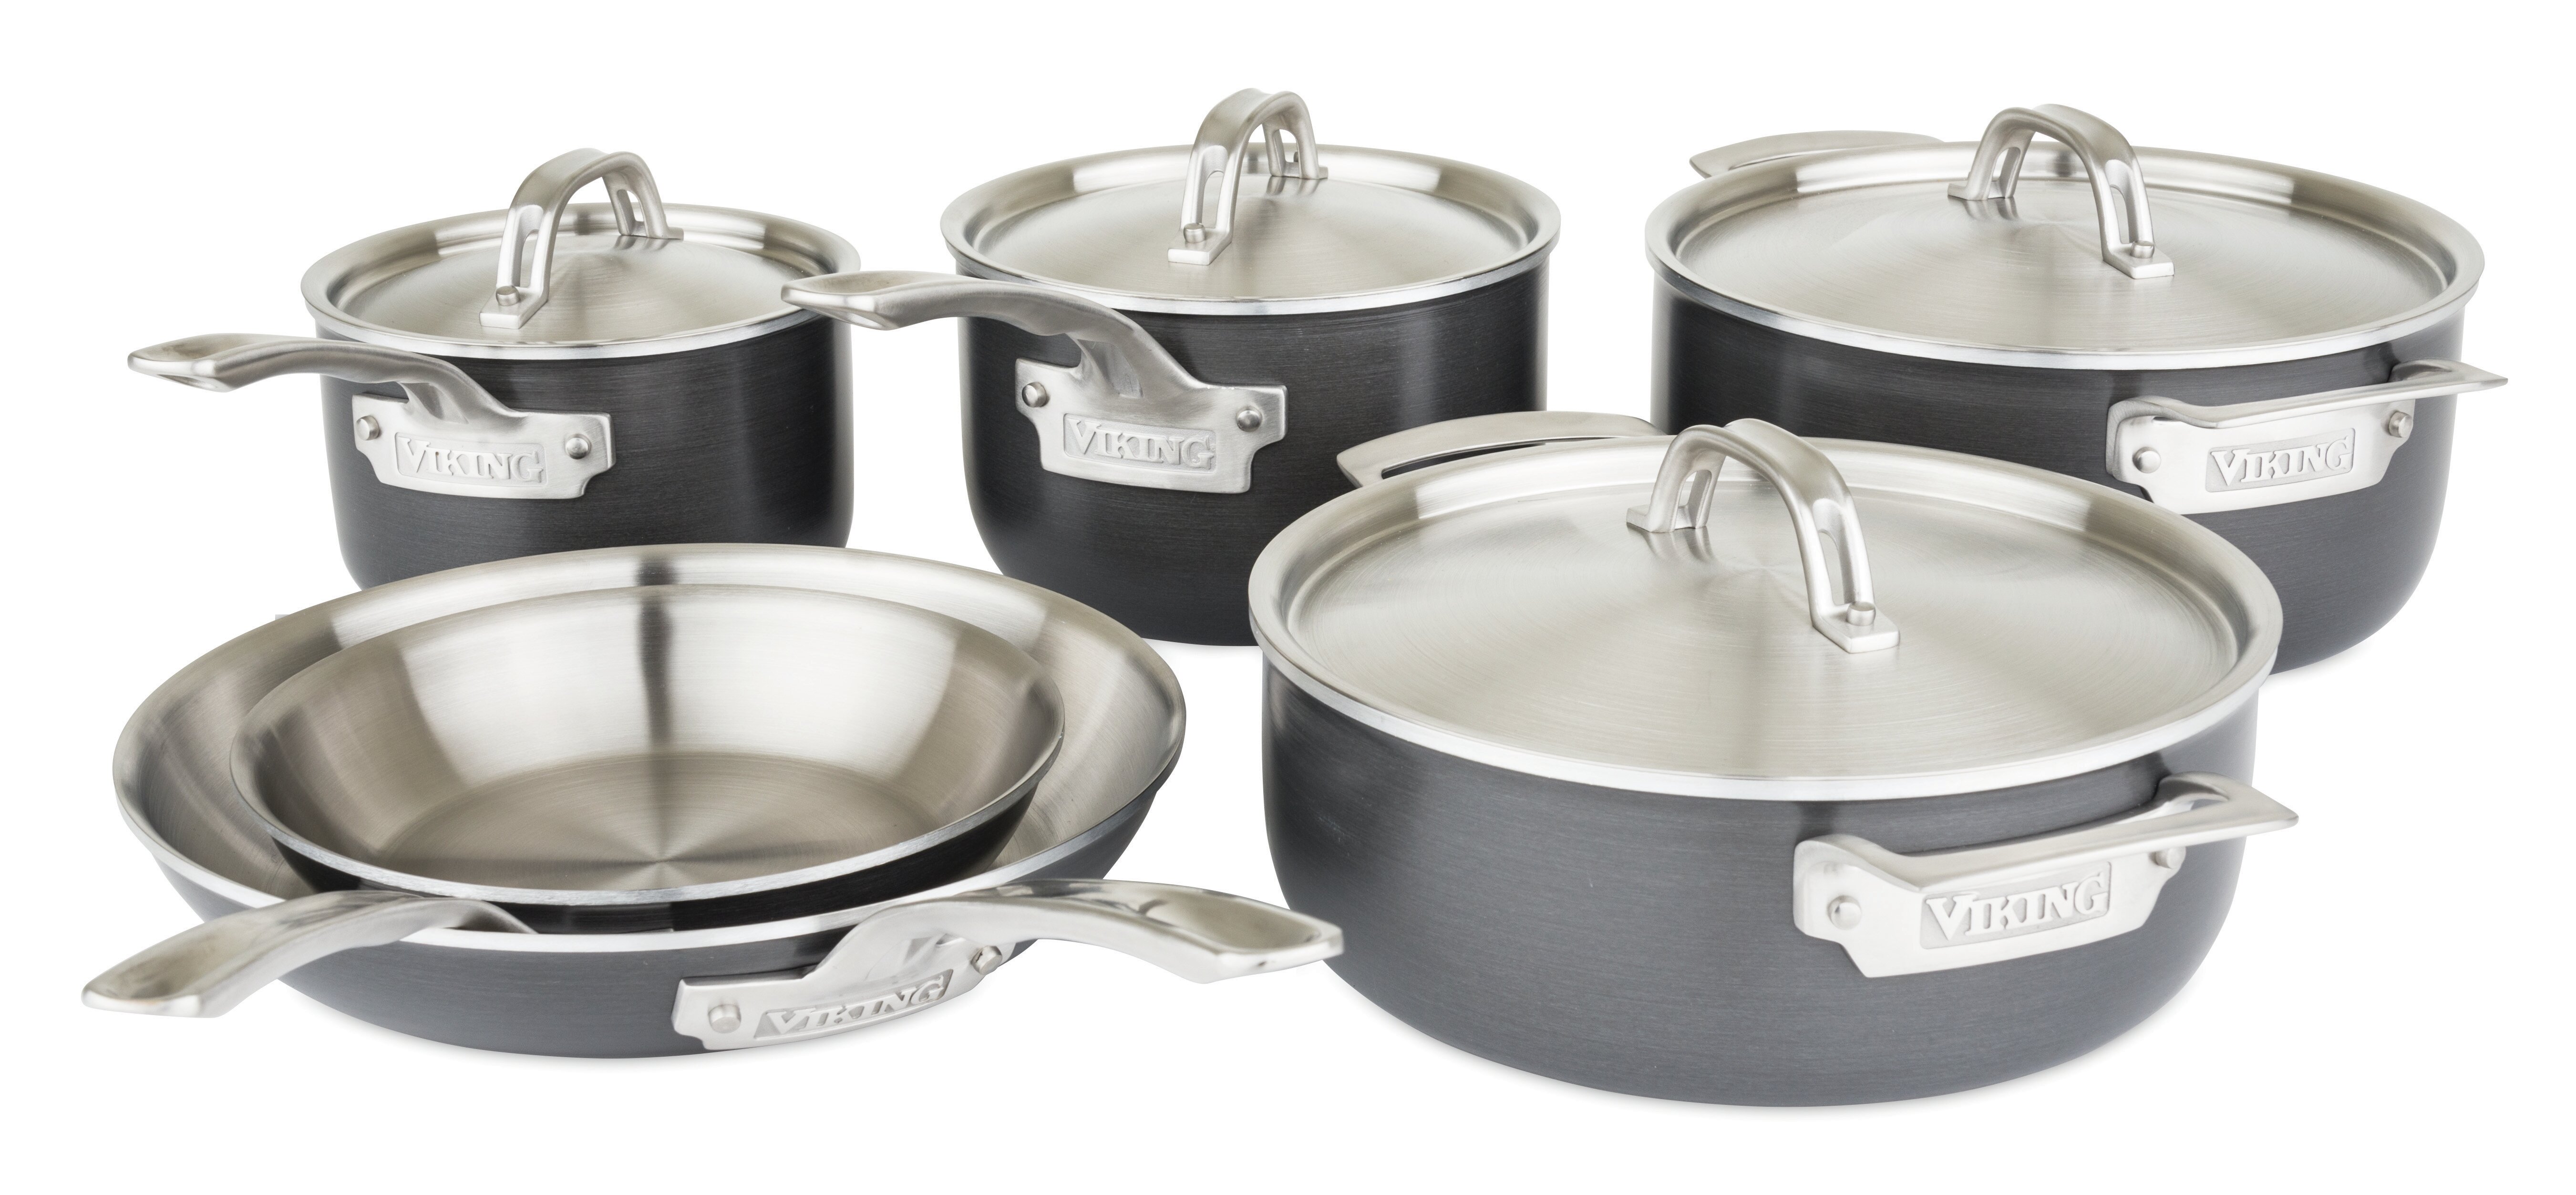 5-Ply Hard Stainless Steel Cookware Set - 10 Piece, Viking